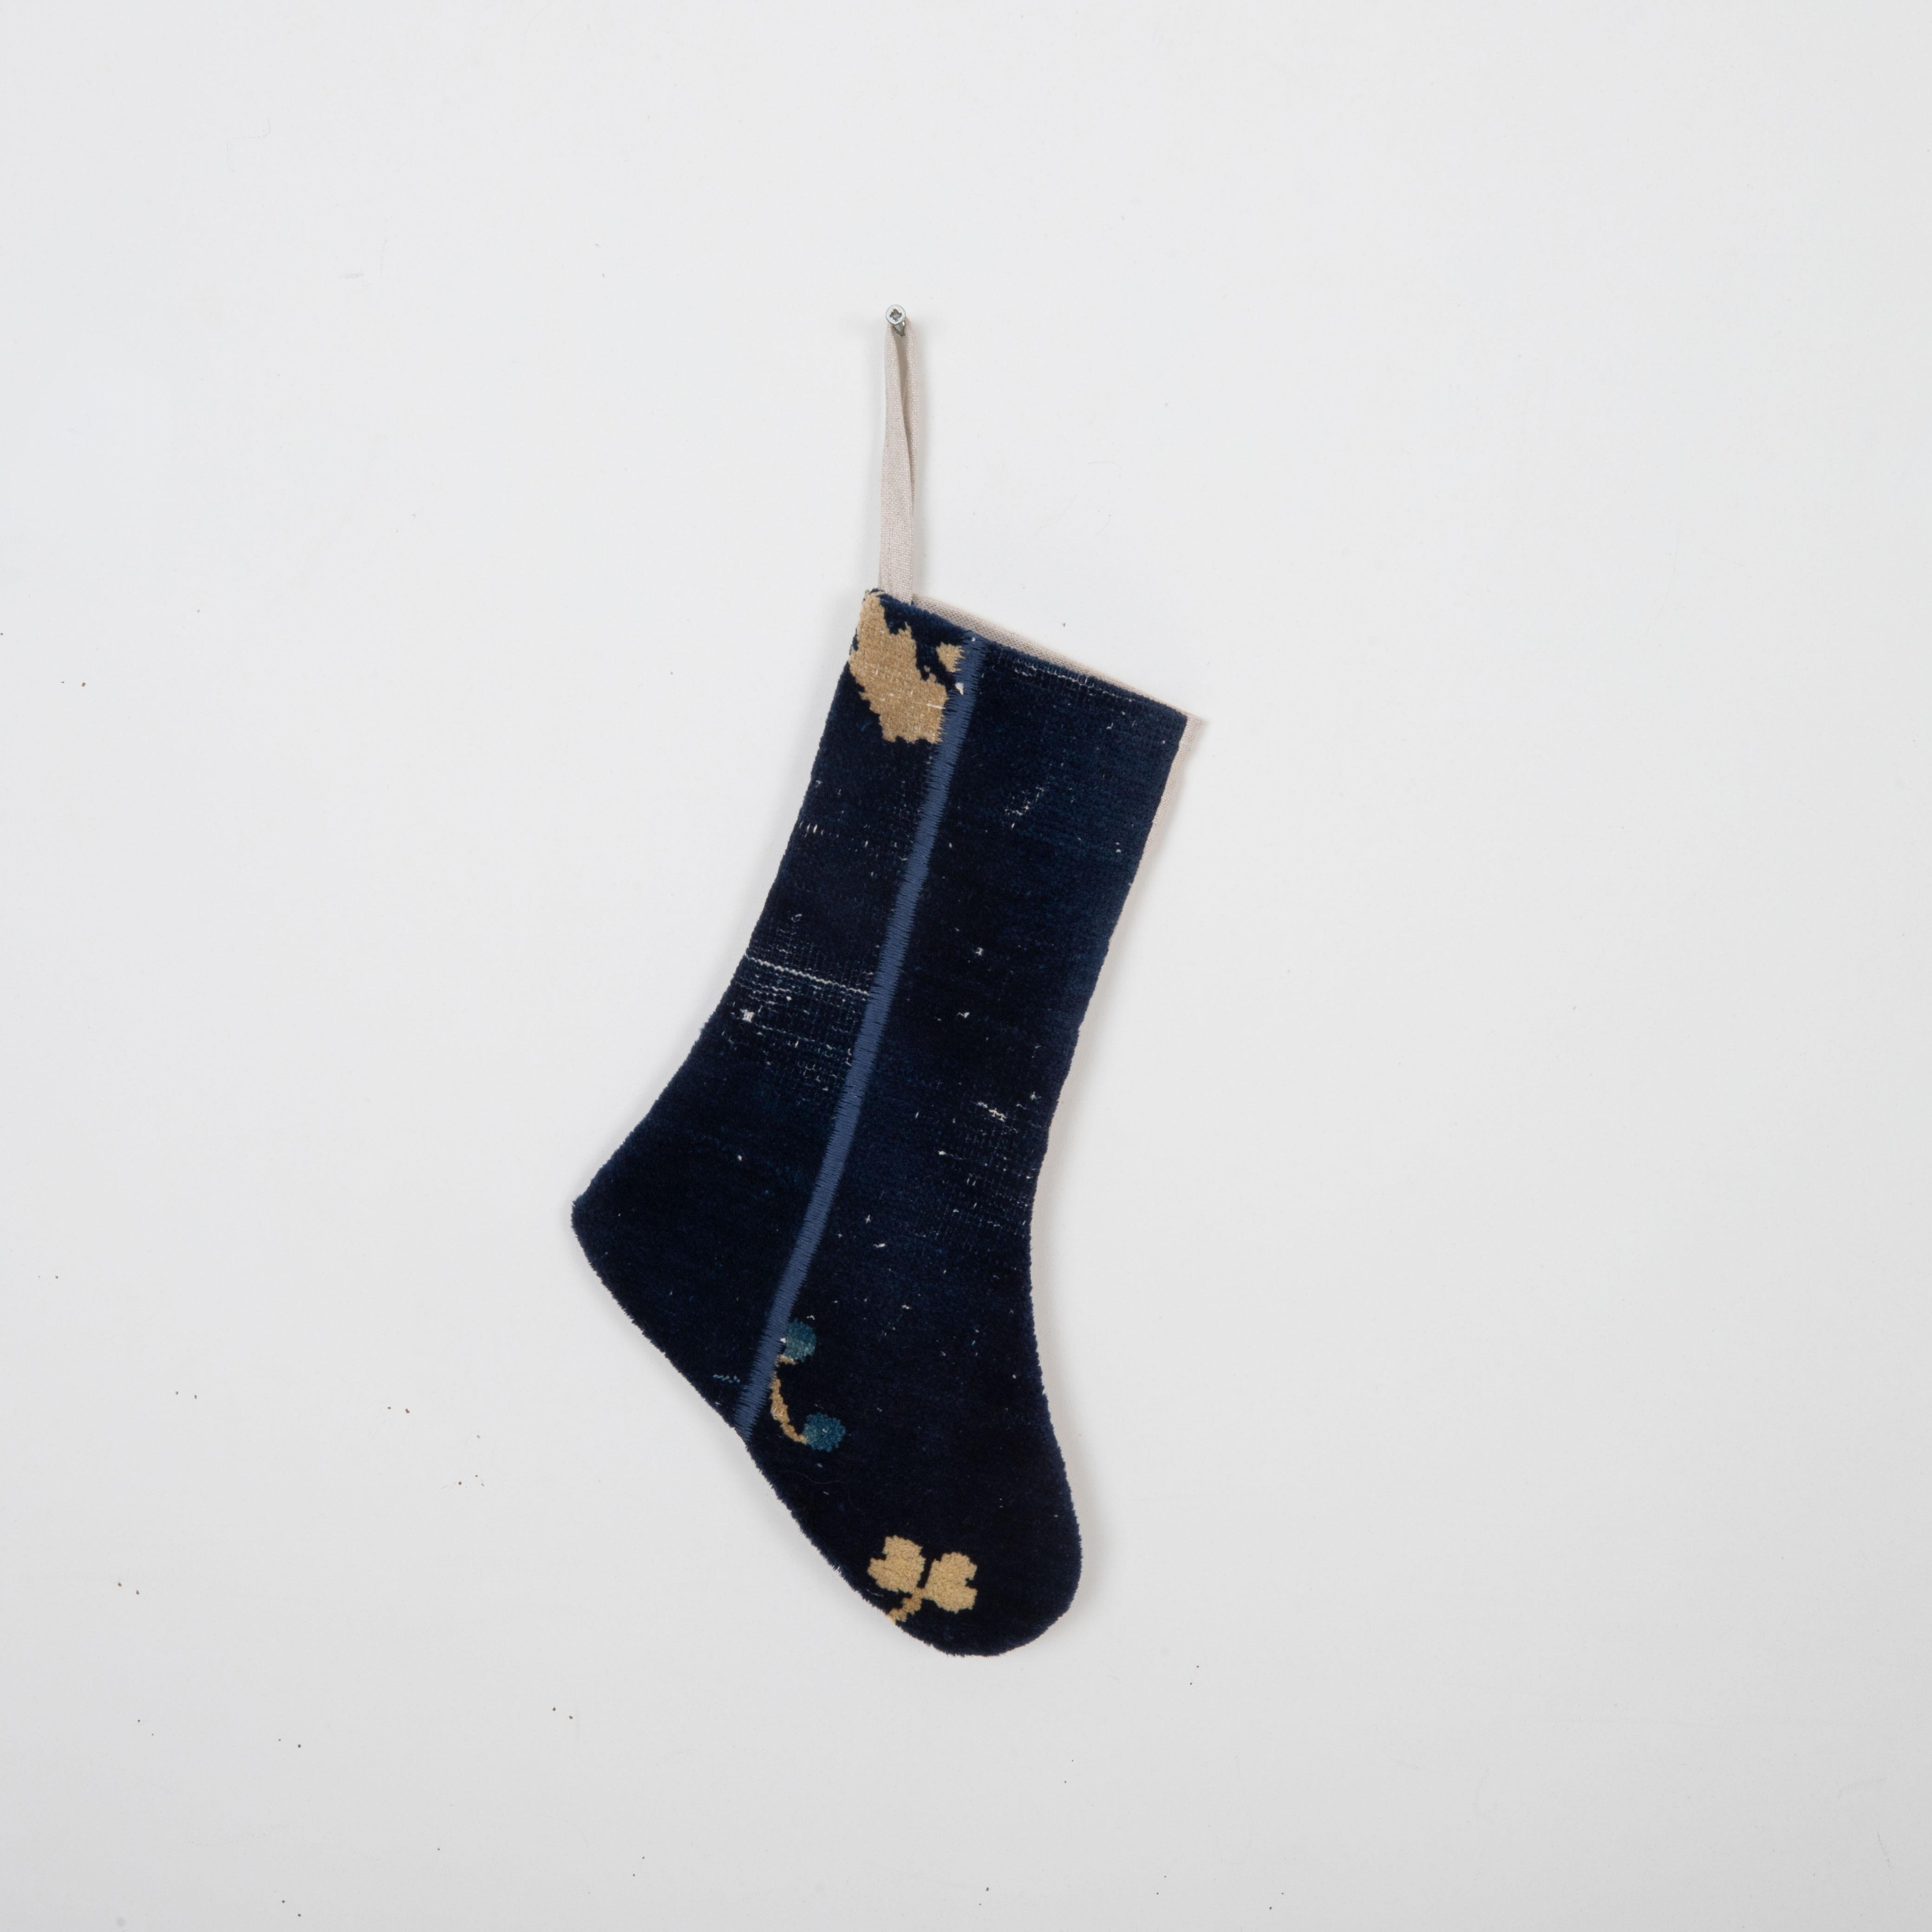 This Christmas Stocking was made from a late 19th or Early 20th C. Chinese rug fragments.
Linen in the back.

Please note, this stocking was made from Chinese rug fragments.
